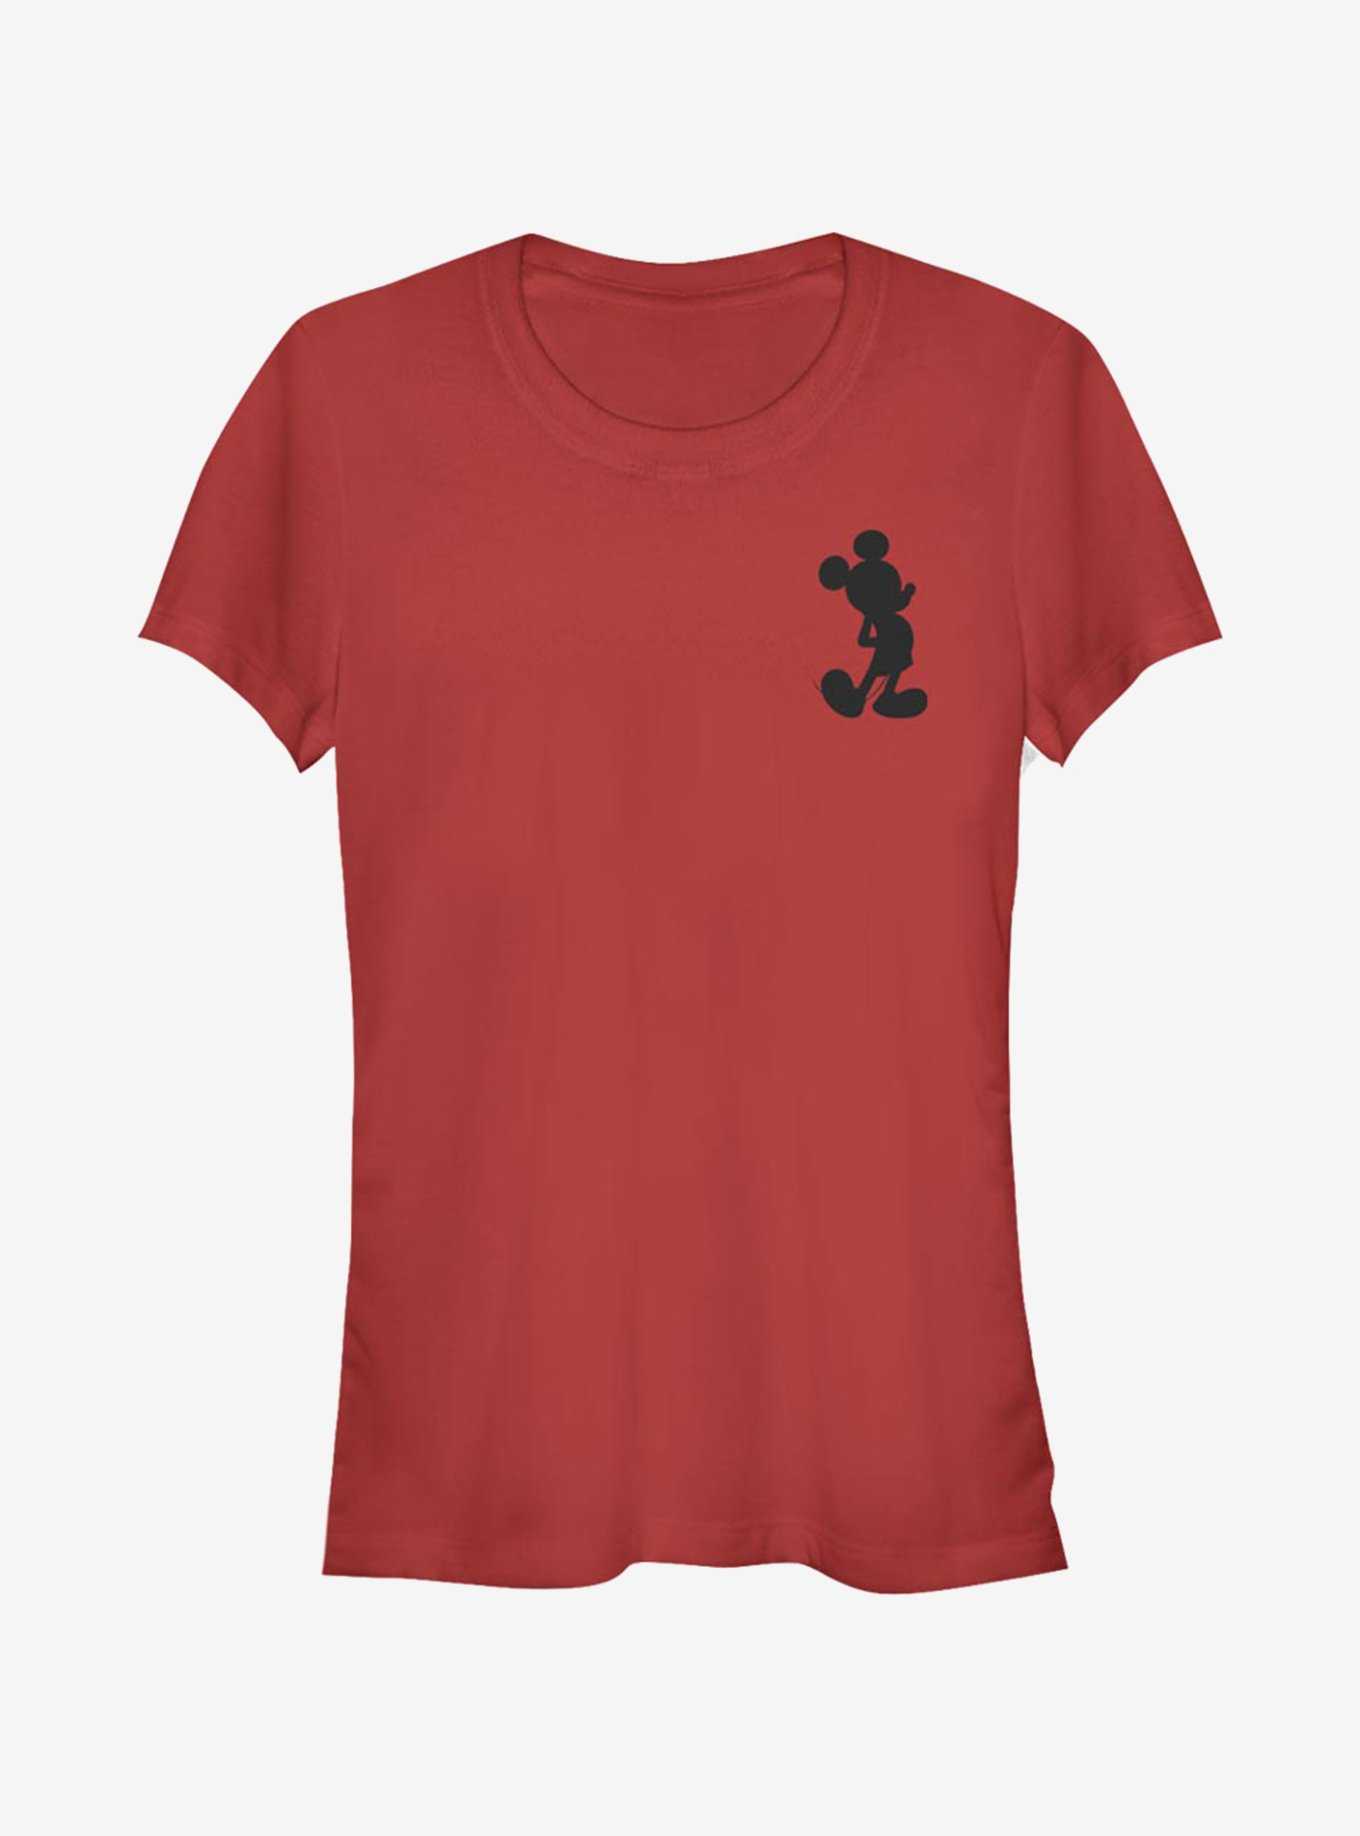 Disney Mickey Mouse Mickey Silhouette Girls T-Shirt, , hi-res